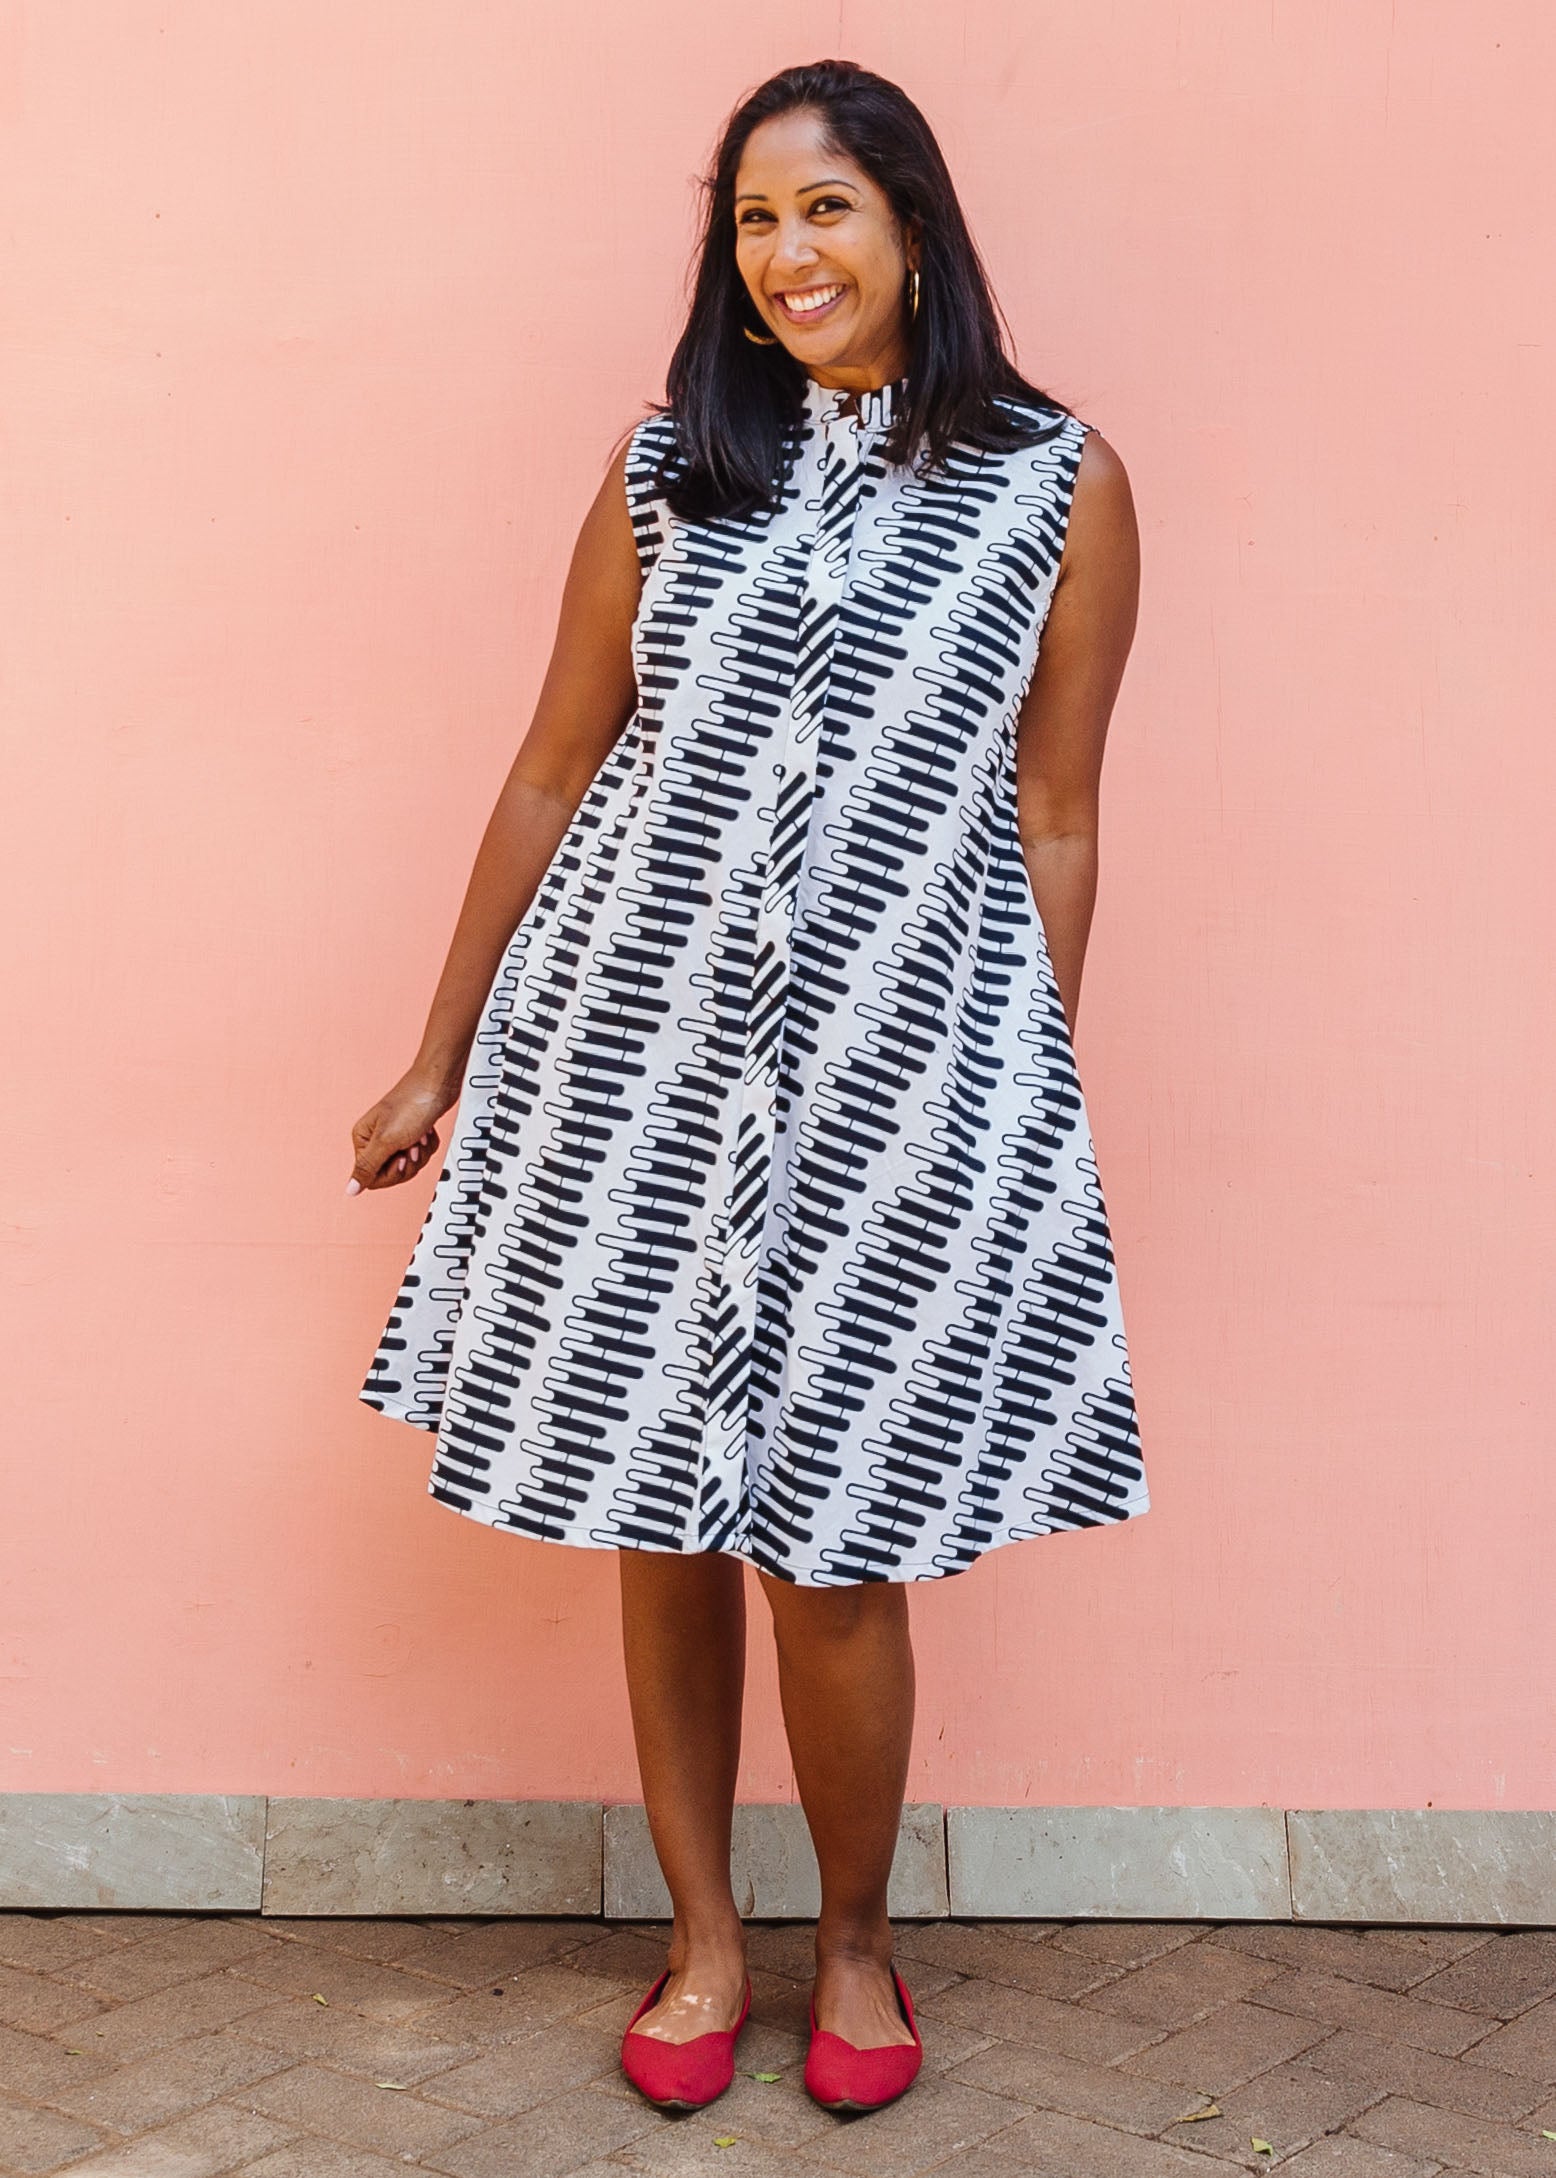 Model wearing white sleevless dress with black and white zigzag print.